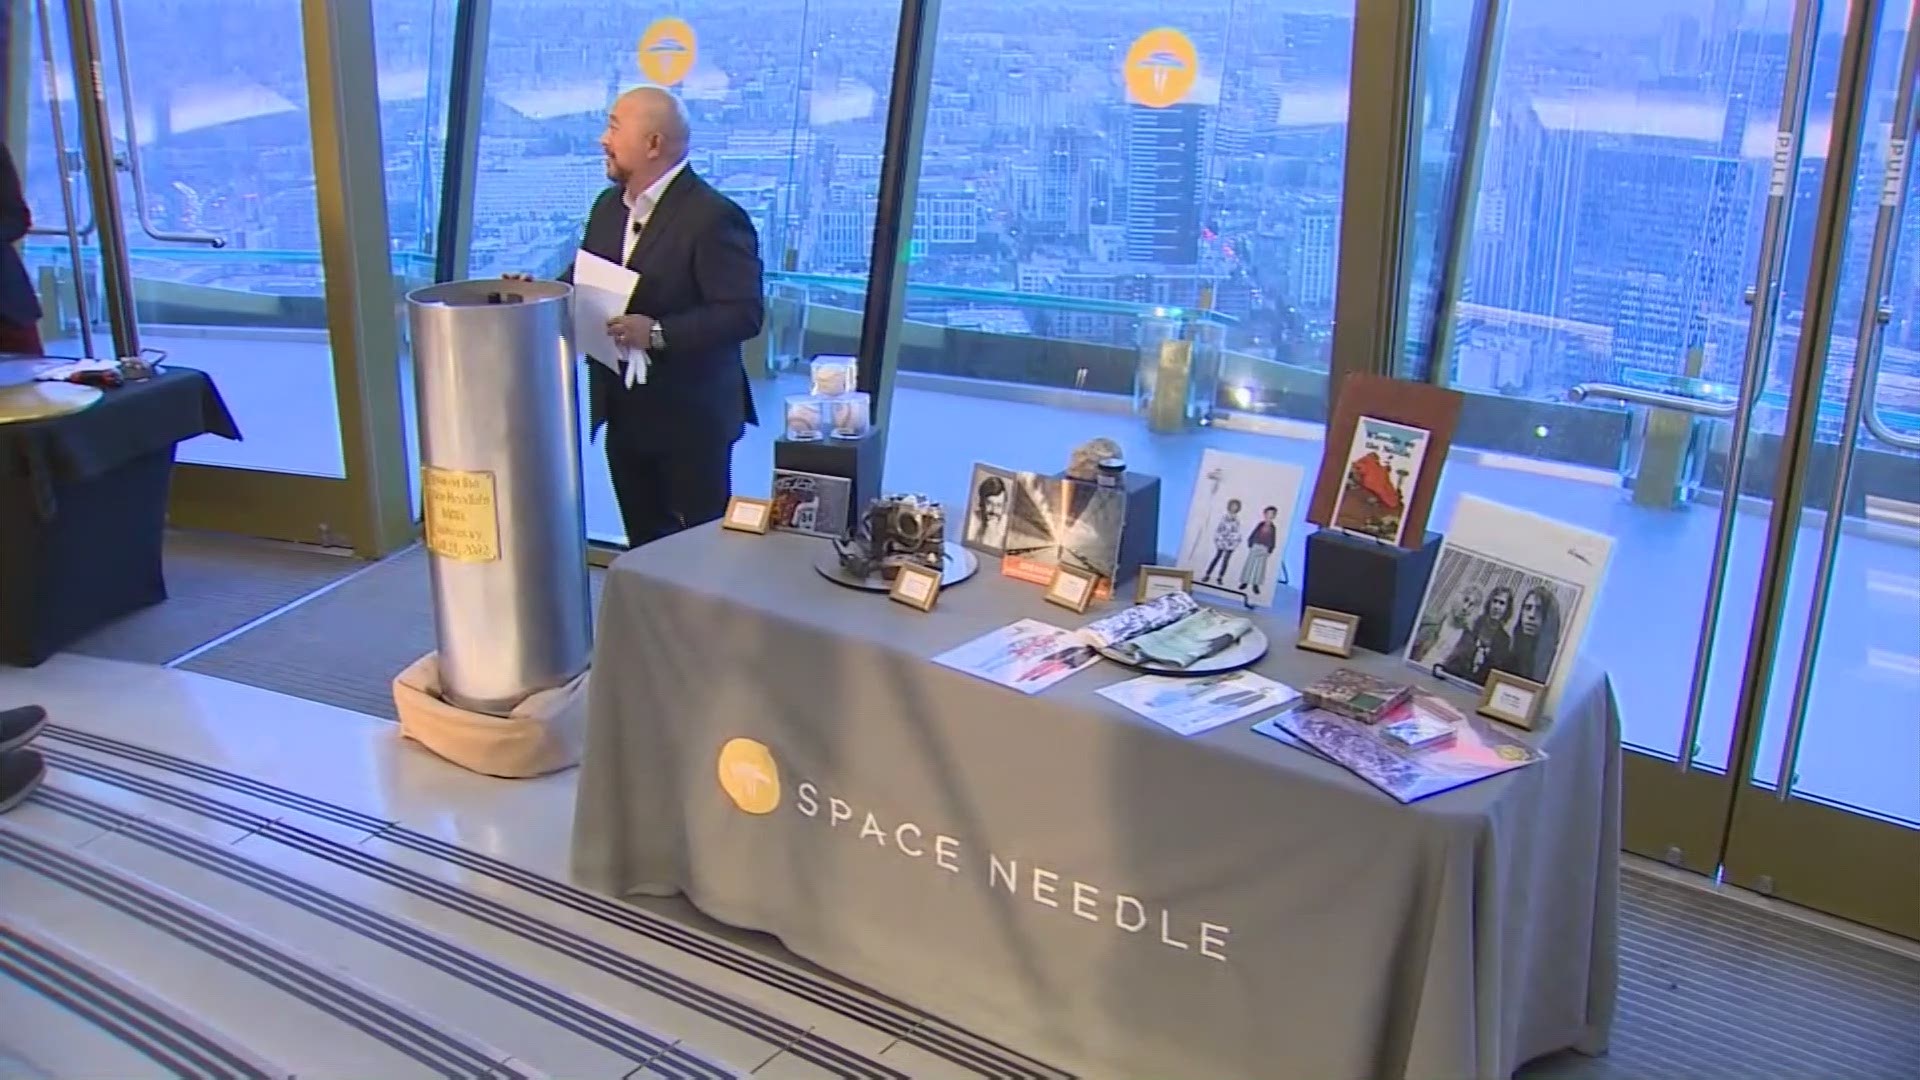 The Space Needle sealed a time capsule on Oct. 21, 2019 that won't be opened until April 21, 2062 — the Space Needle's 100th anniversary.